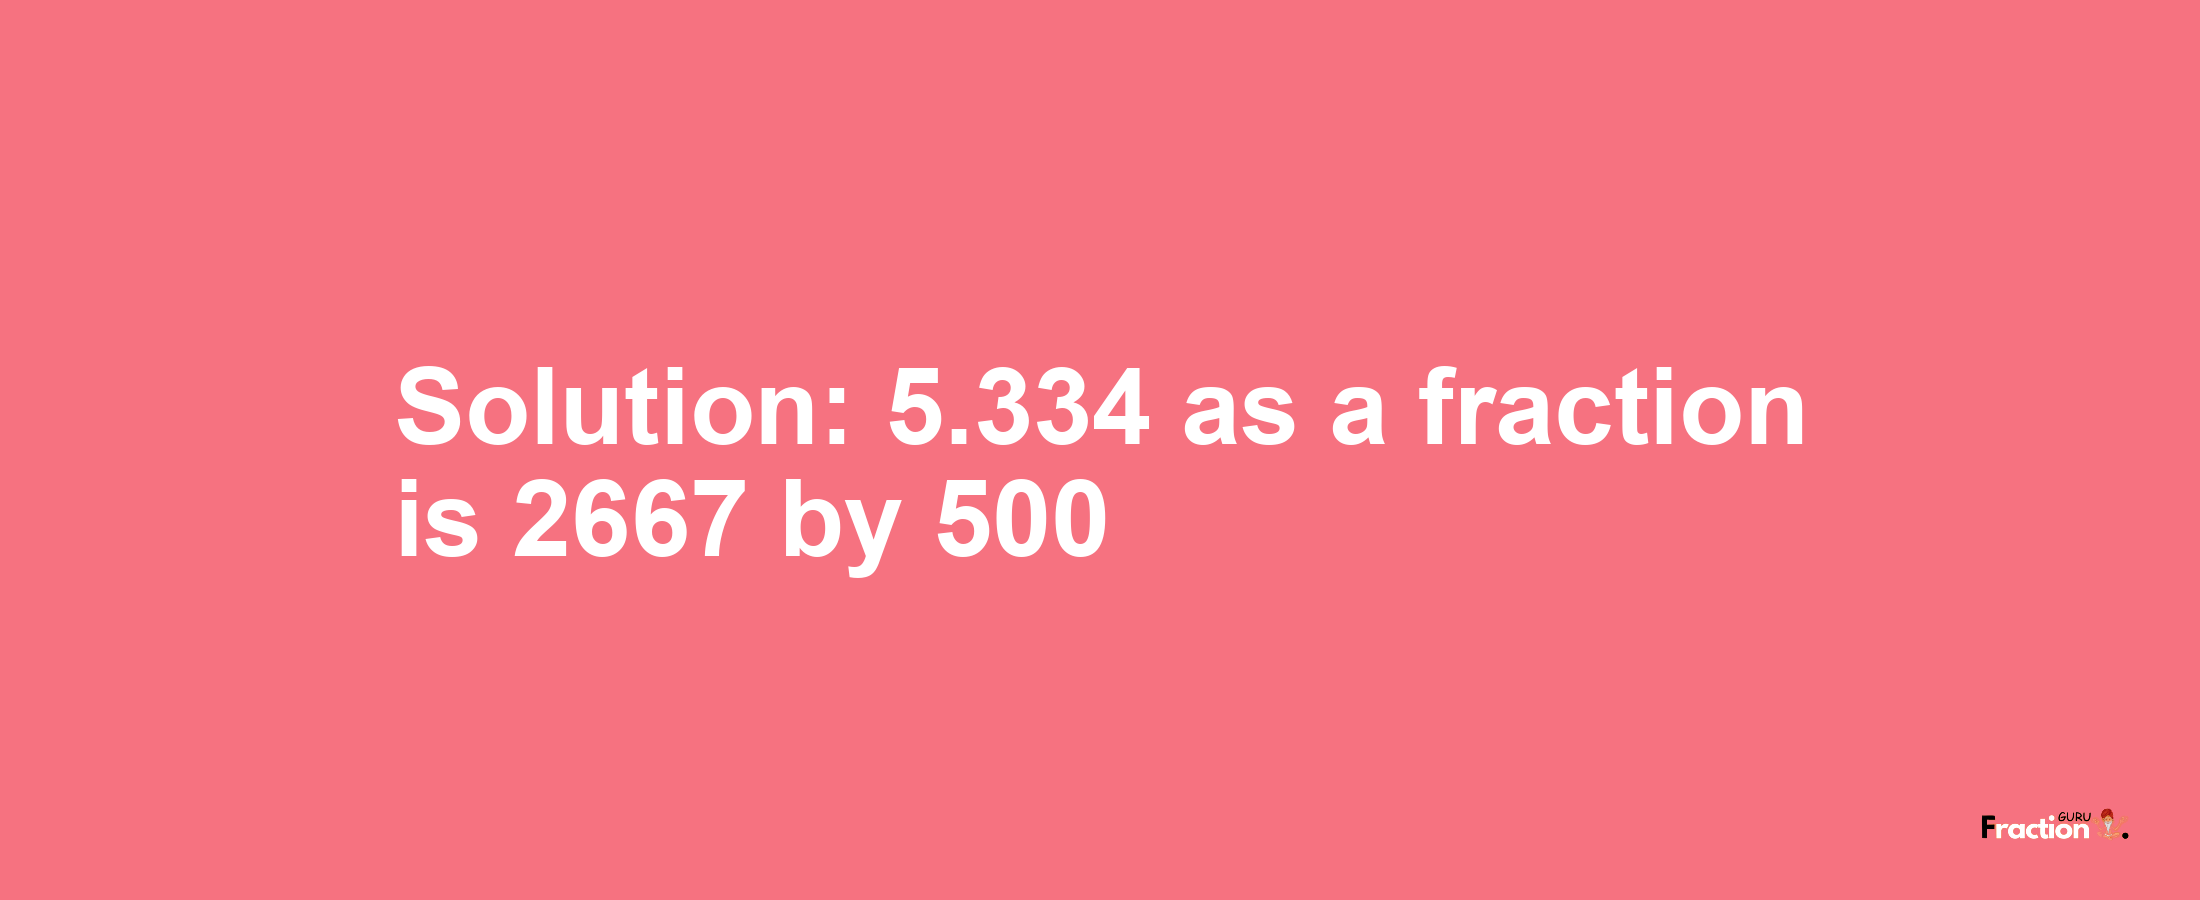 Solution:5.334 as a fraction is 2667/500